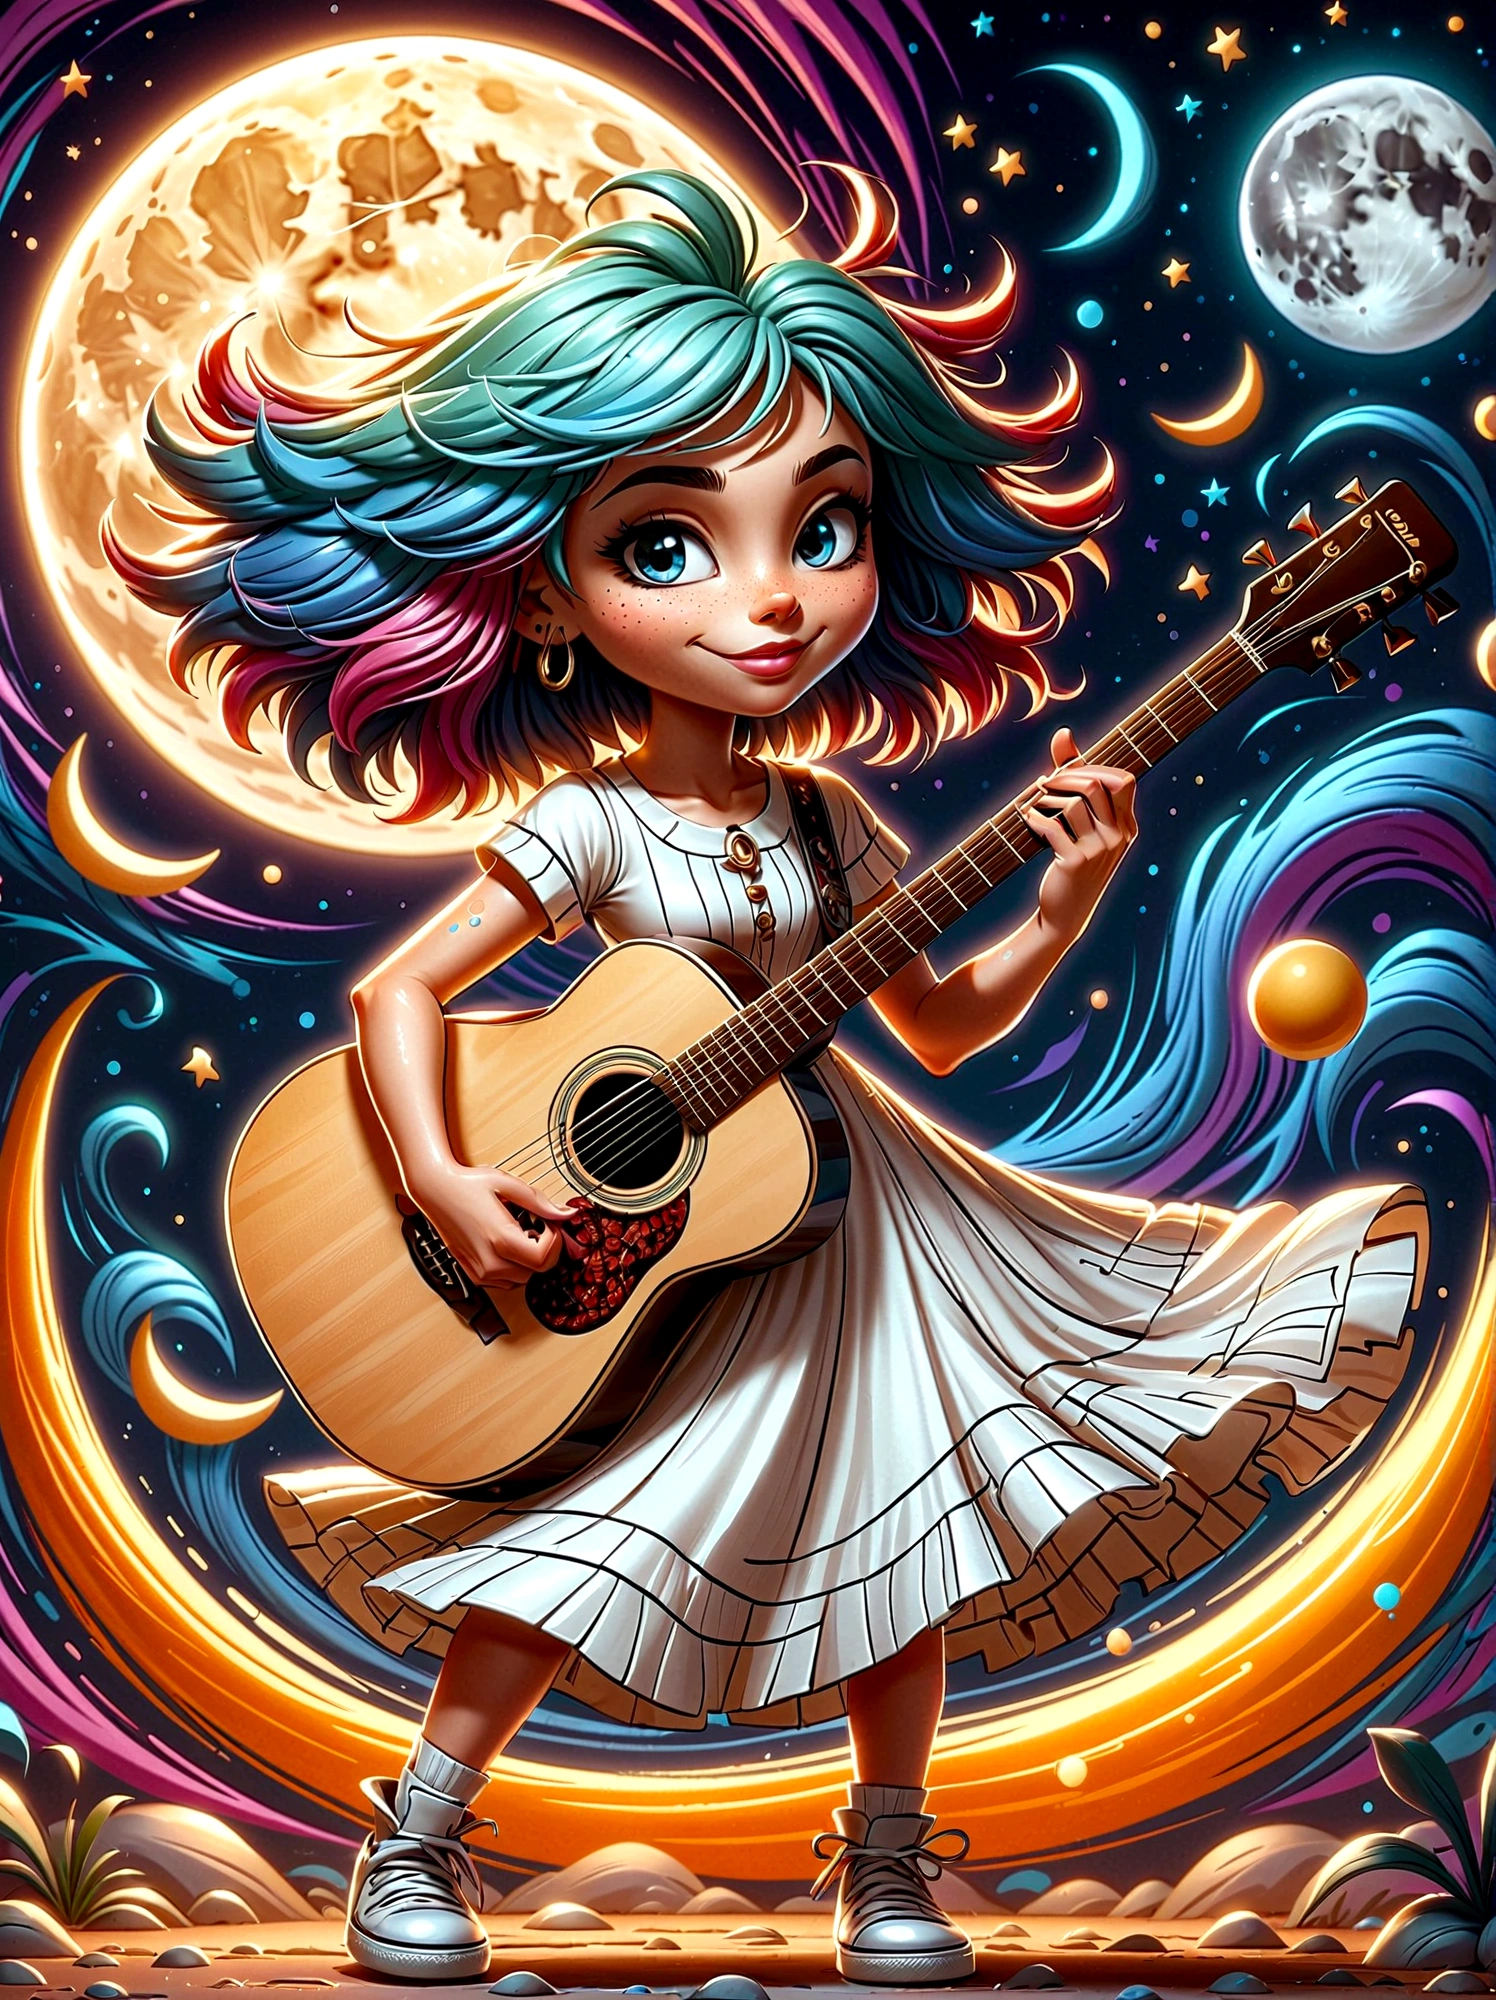 A cartoon doodle character，Vector illustration，1girl，solo，the guitar player，With brightly colored hair，Girl dancing gracefully in a white long dress，In the surreal and dreamy sky，She stood on a crescent moon，Keeping Balance While Playing Guitar，Rendering showing melting elements，Elements appear to drip and deform smoothly，Using a digital style should capture the scene，As seen through the long exposure technique，Create a sense of continuous movement and change，The scene is mysterious and ethereal，Soft moonlight fills the surroundings，Rendered with soft brushstrokes，Exude a sense of whimsy and charm in this moonlight fantasy，Anatomically correct，Textured Skin，Standing in front of a graffiti style background，Add whimsy to the scene，1xhsn1